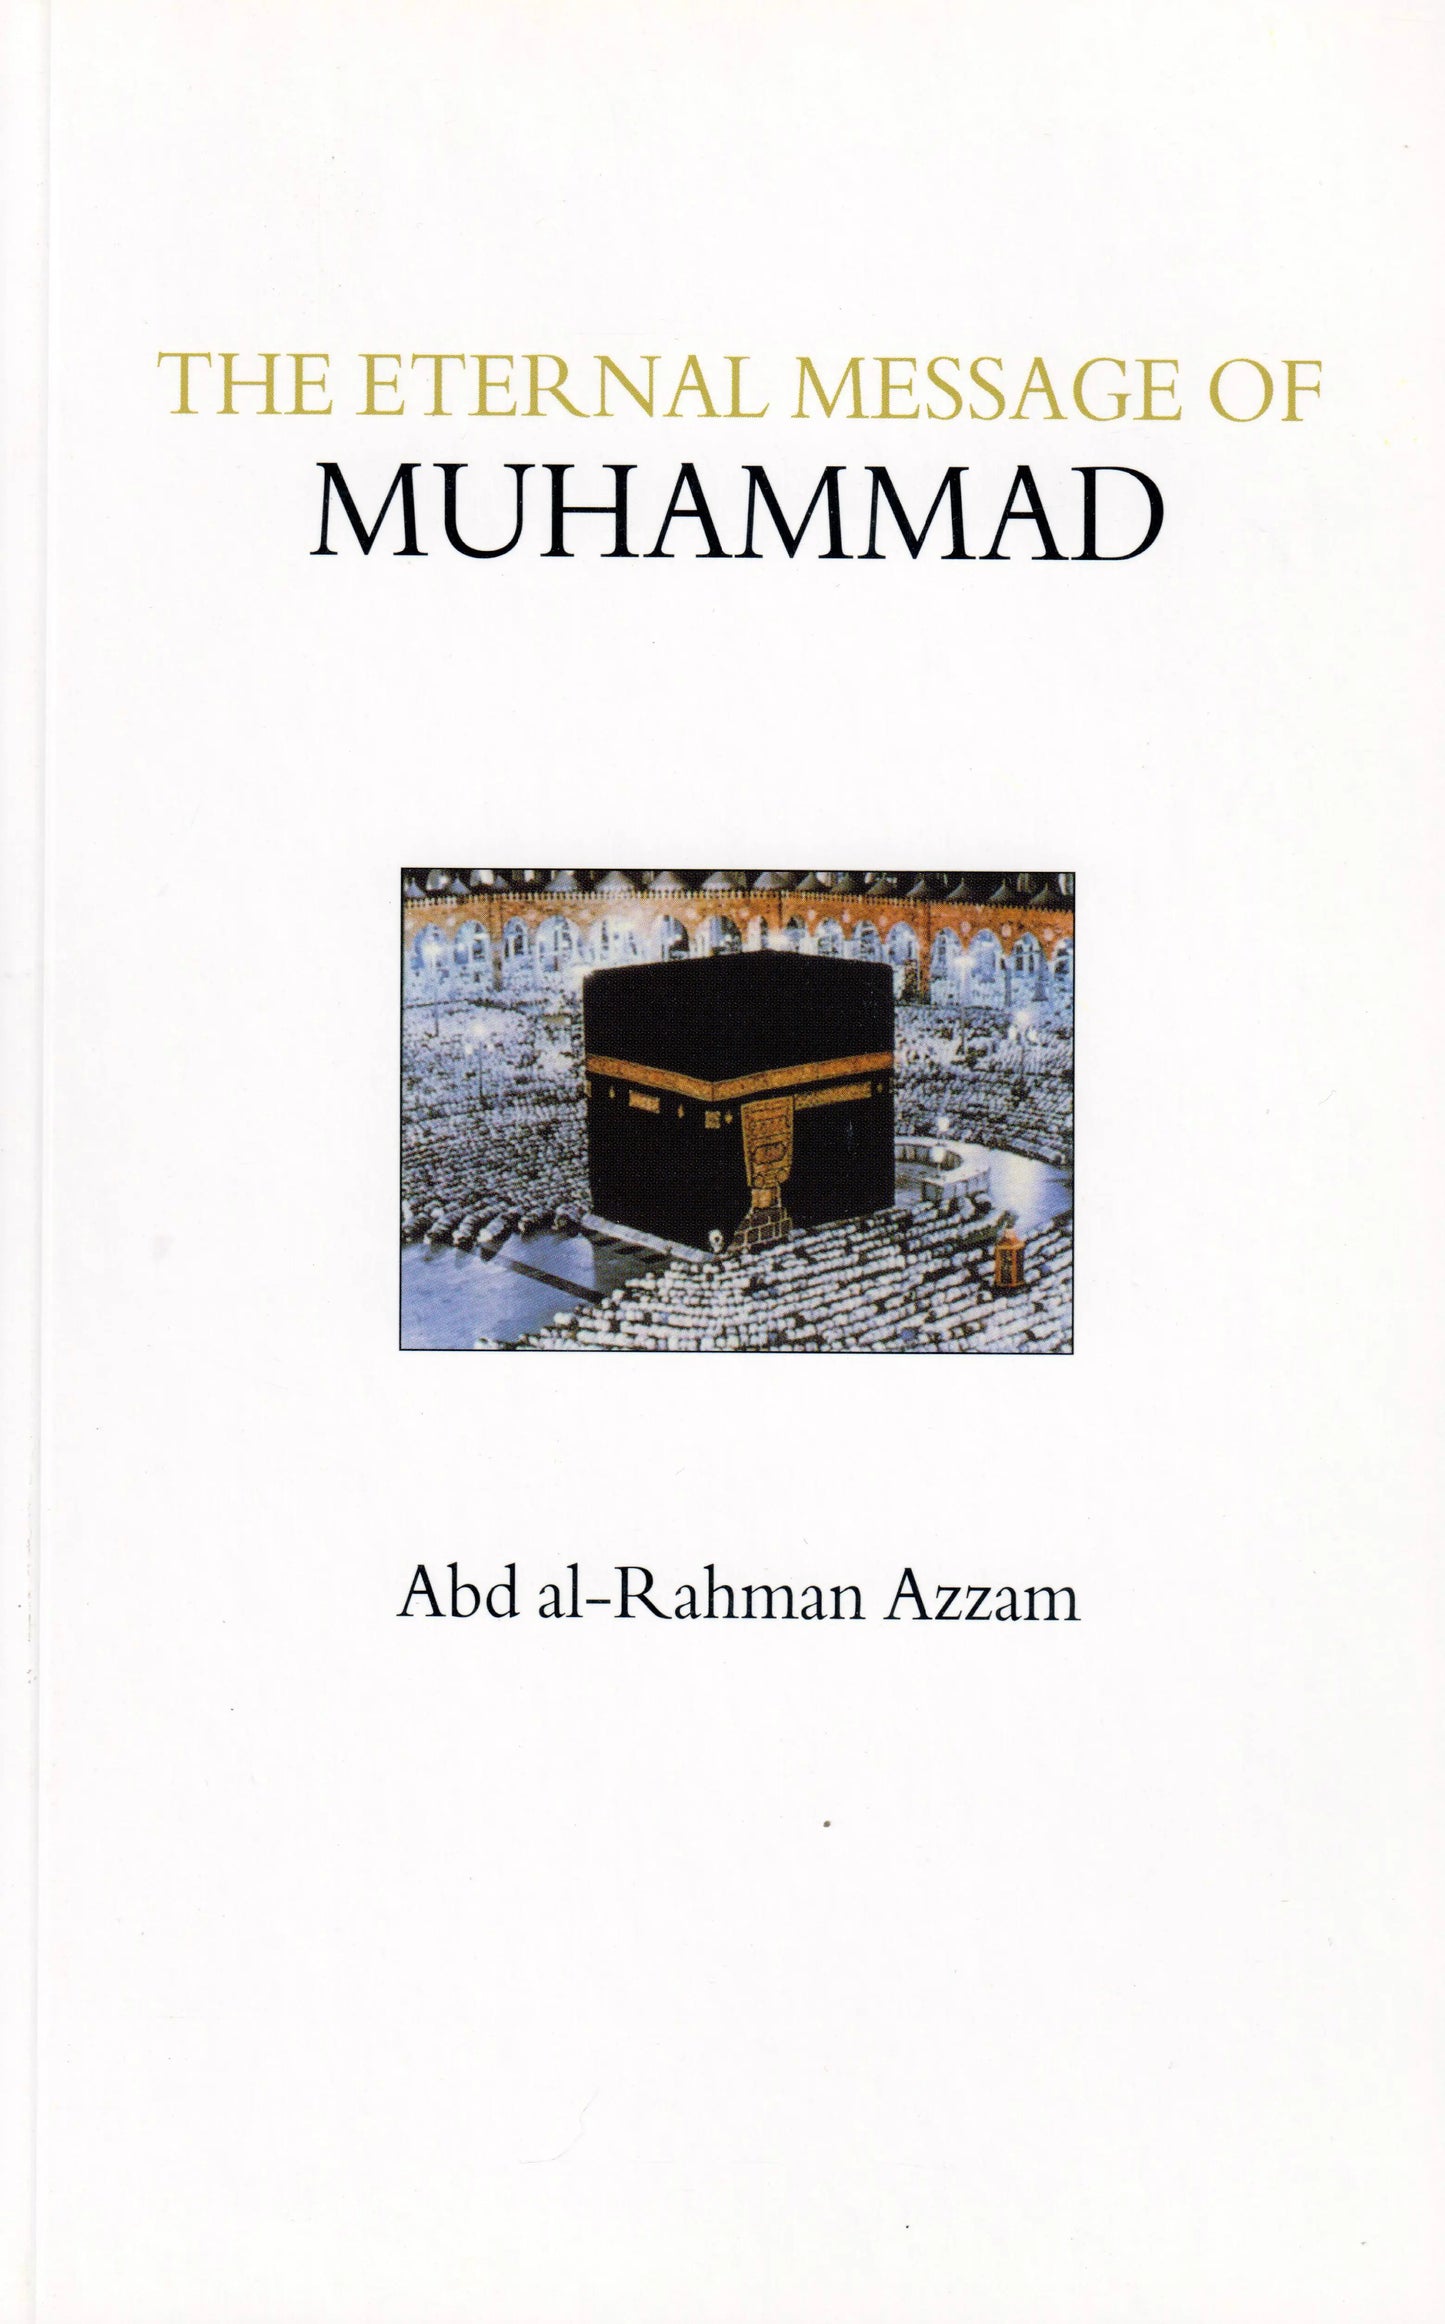 The Eternal Message of Muhammad Islamic Texts Society